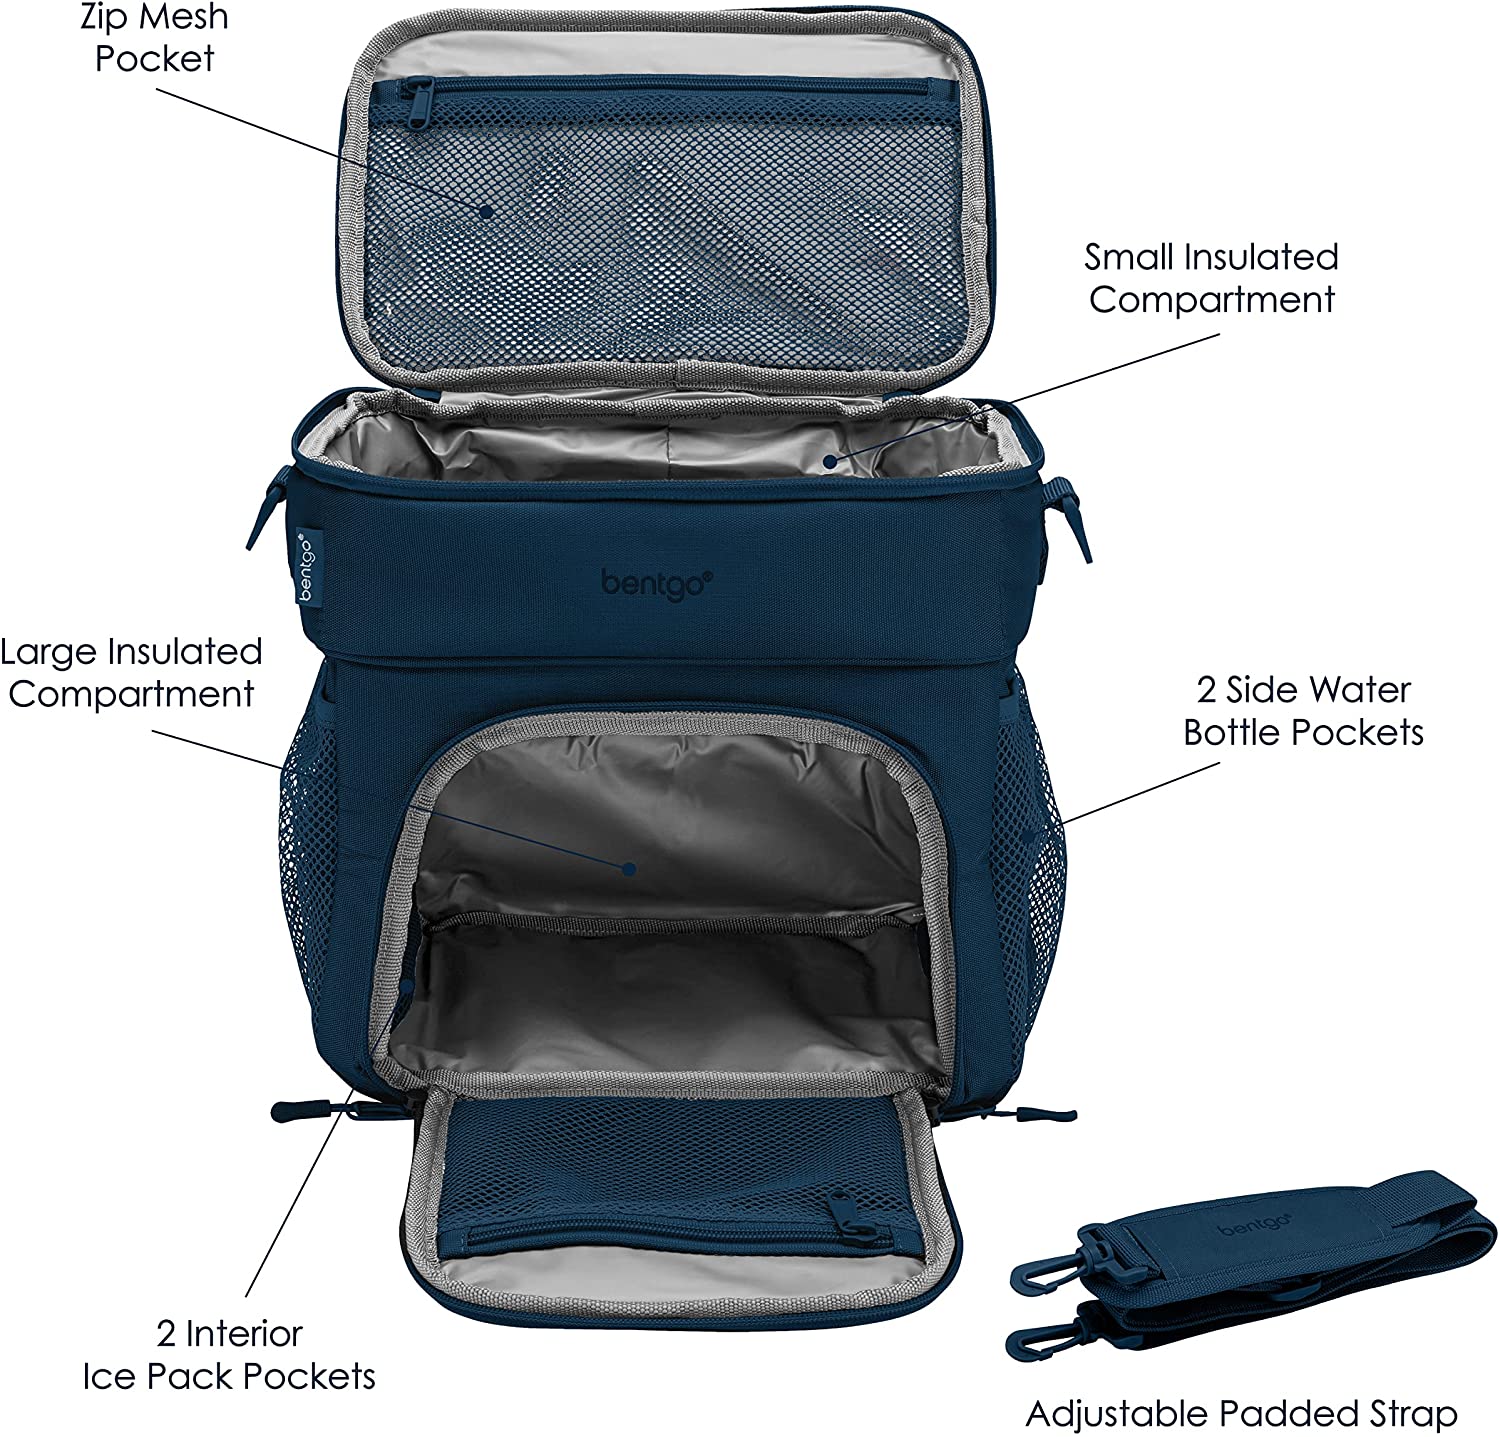 https://bigbigmart.com/wp-content/uploads/2022/07/Bentgo%C2%AE-Prep-Deluxe-Multimeal-Bag-Premium-Insulation-up-to-8-Hrs-with-Water-Resistant-Exterior-Interior-Extra-Large-Lunch-Bag-Holds-4-Meals-Snacks-Great-for-All-Day-Meal-Prep-Navy-Blue6.jpg